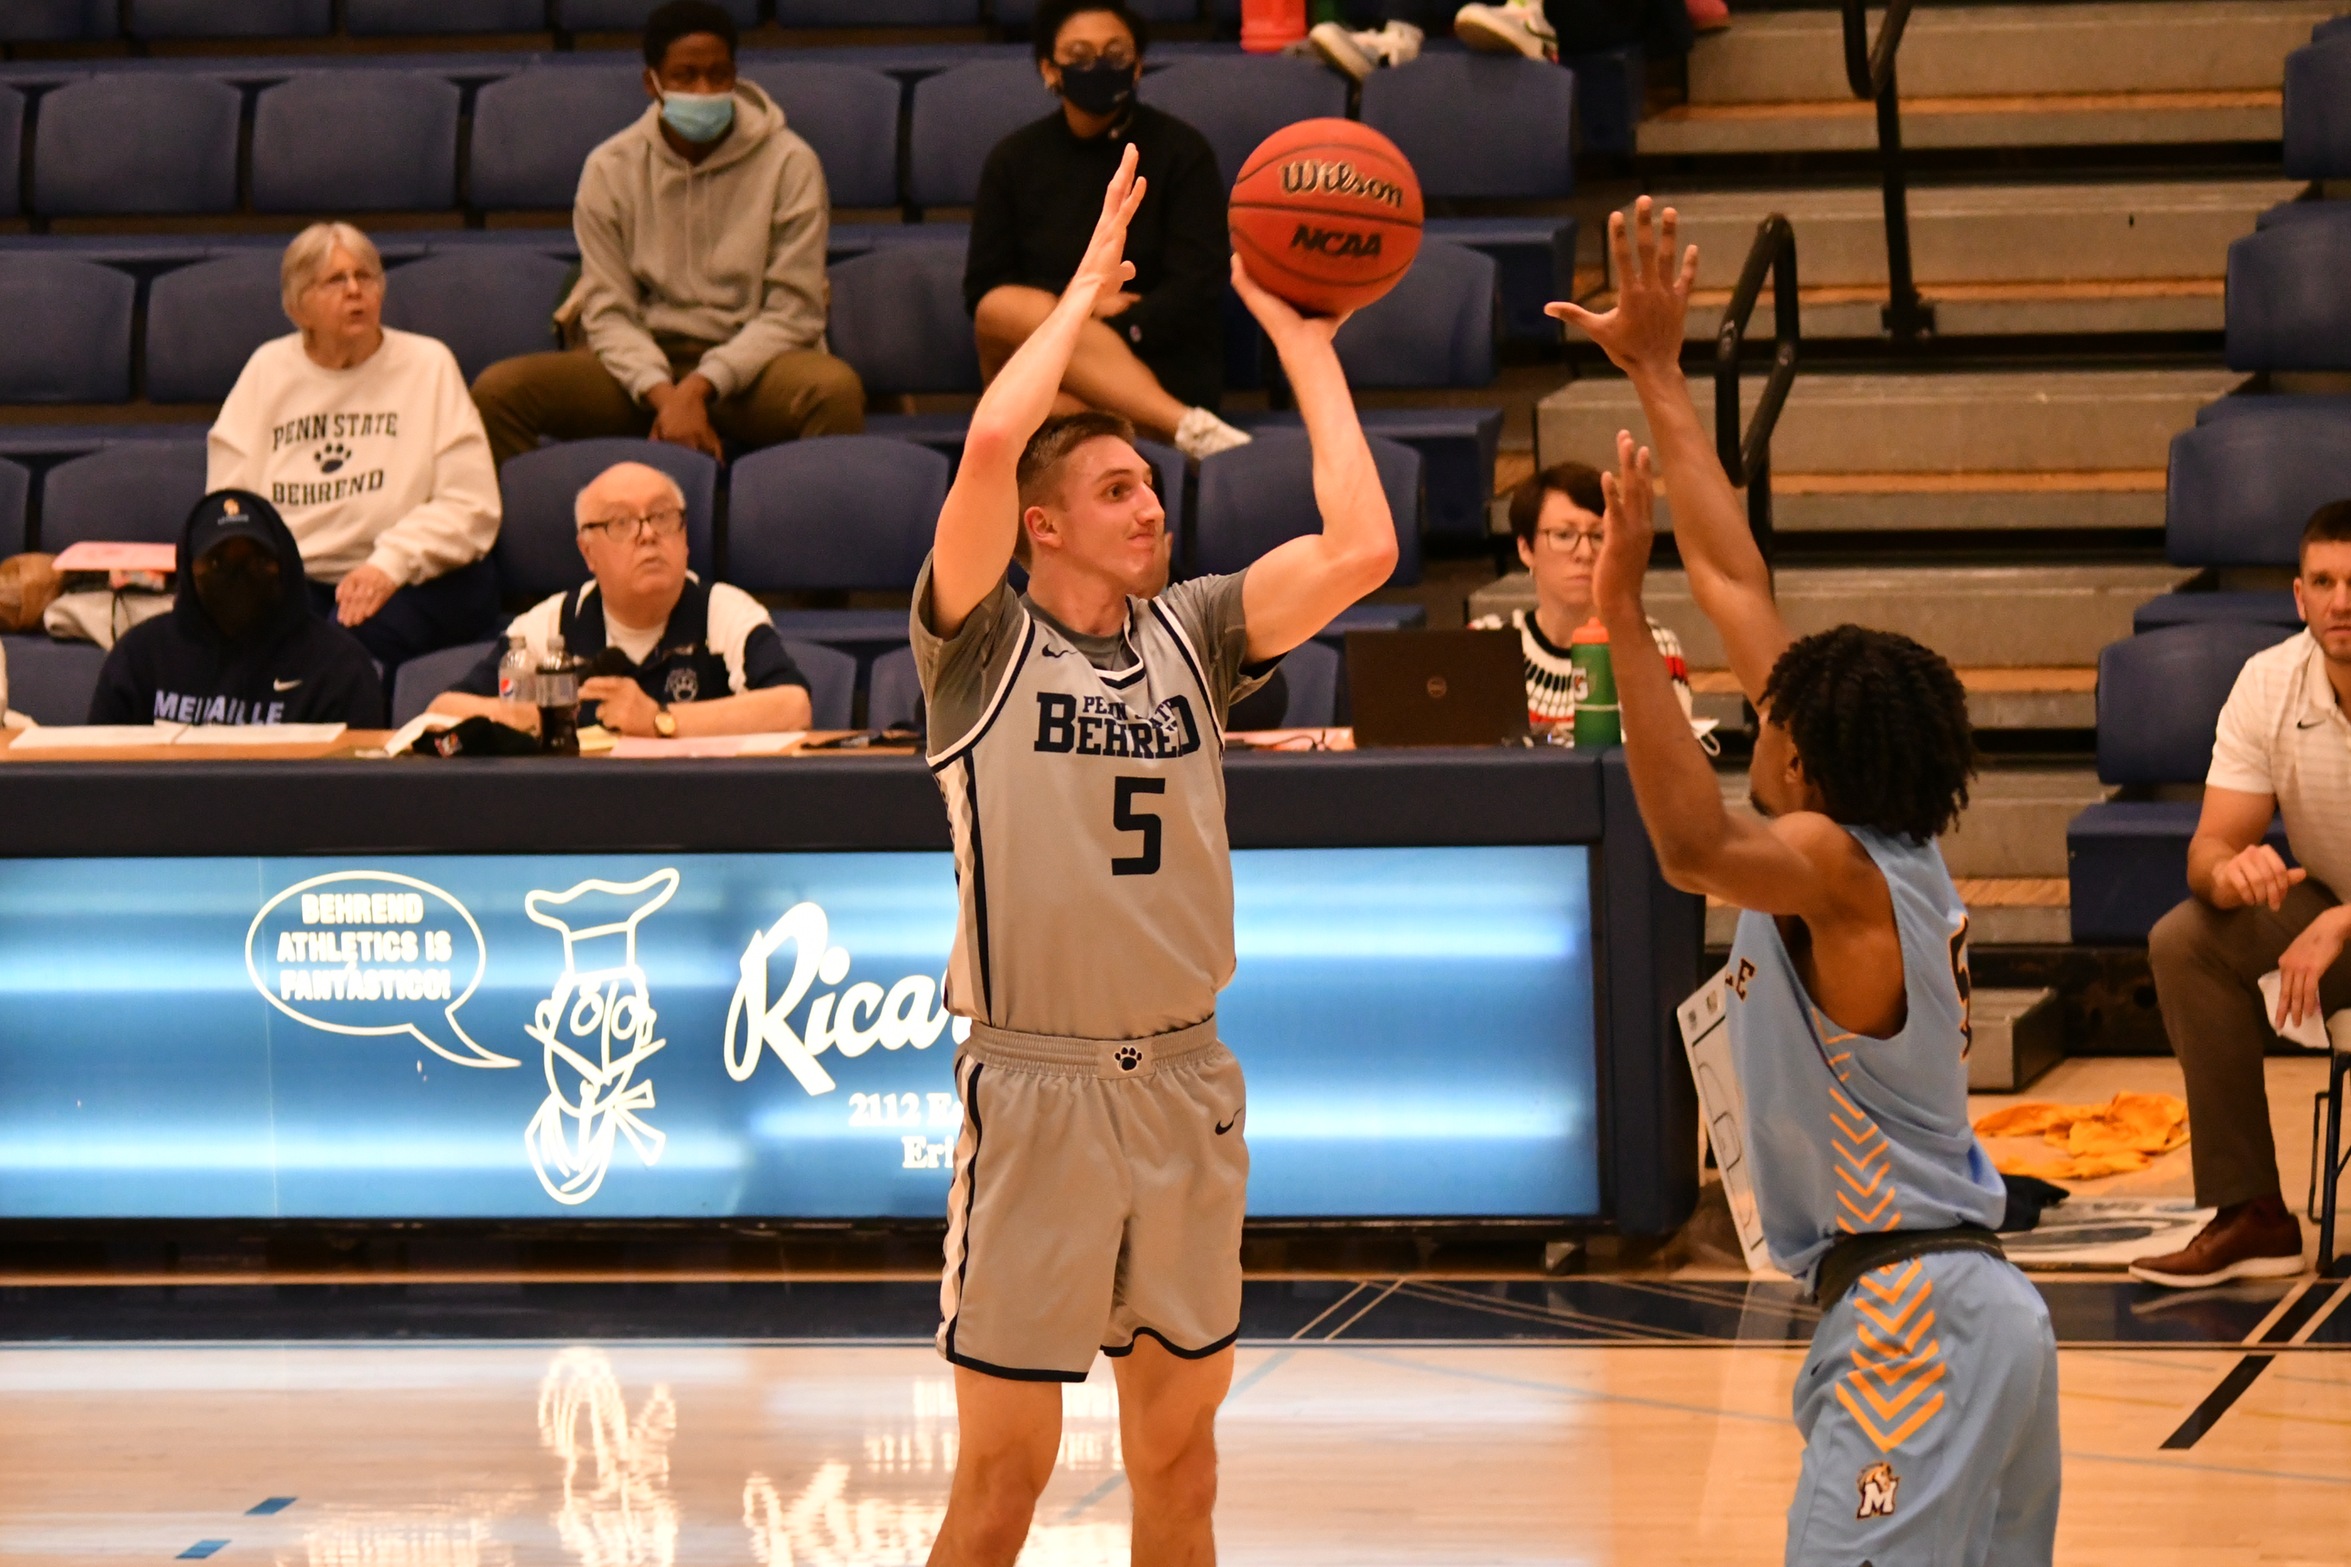 Lions Claim Hosting Rights to AMCC Tournament as Behrend Outlasts Altoona